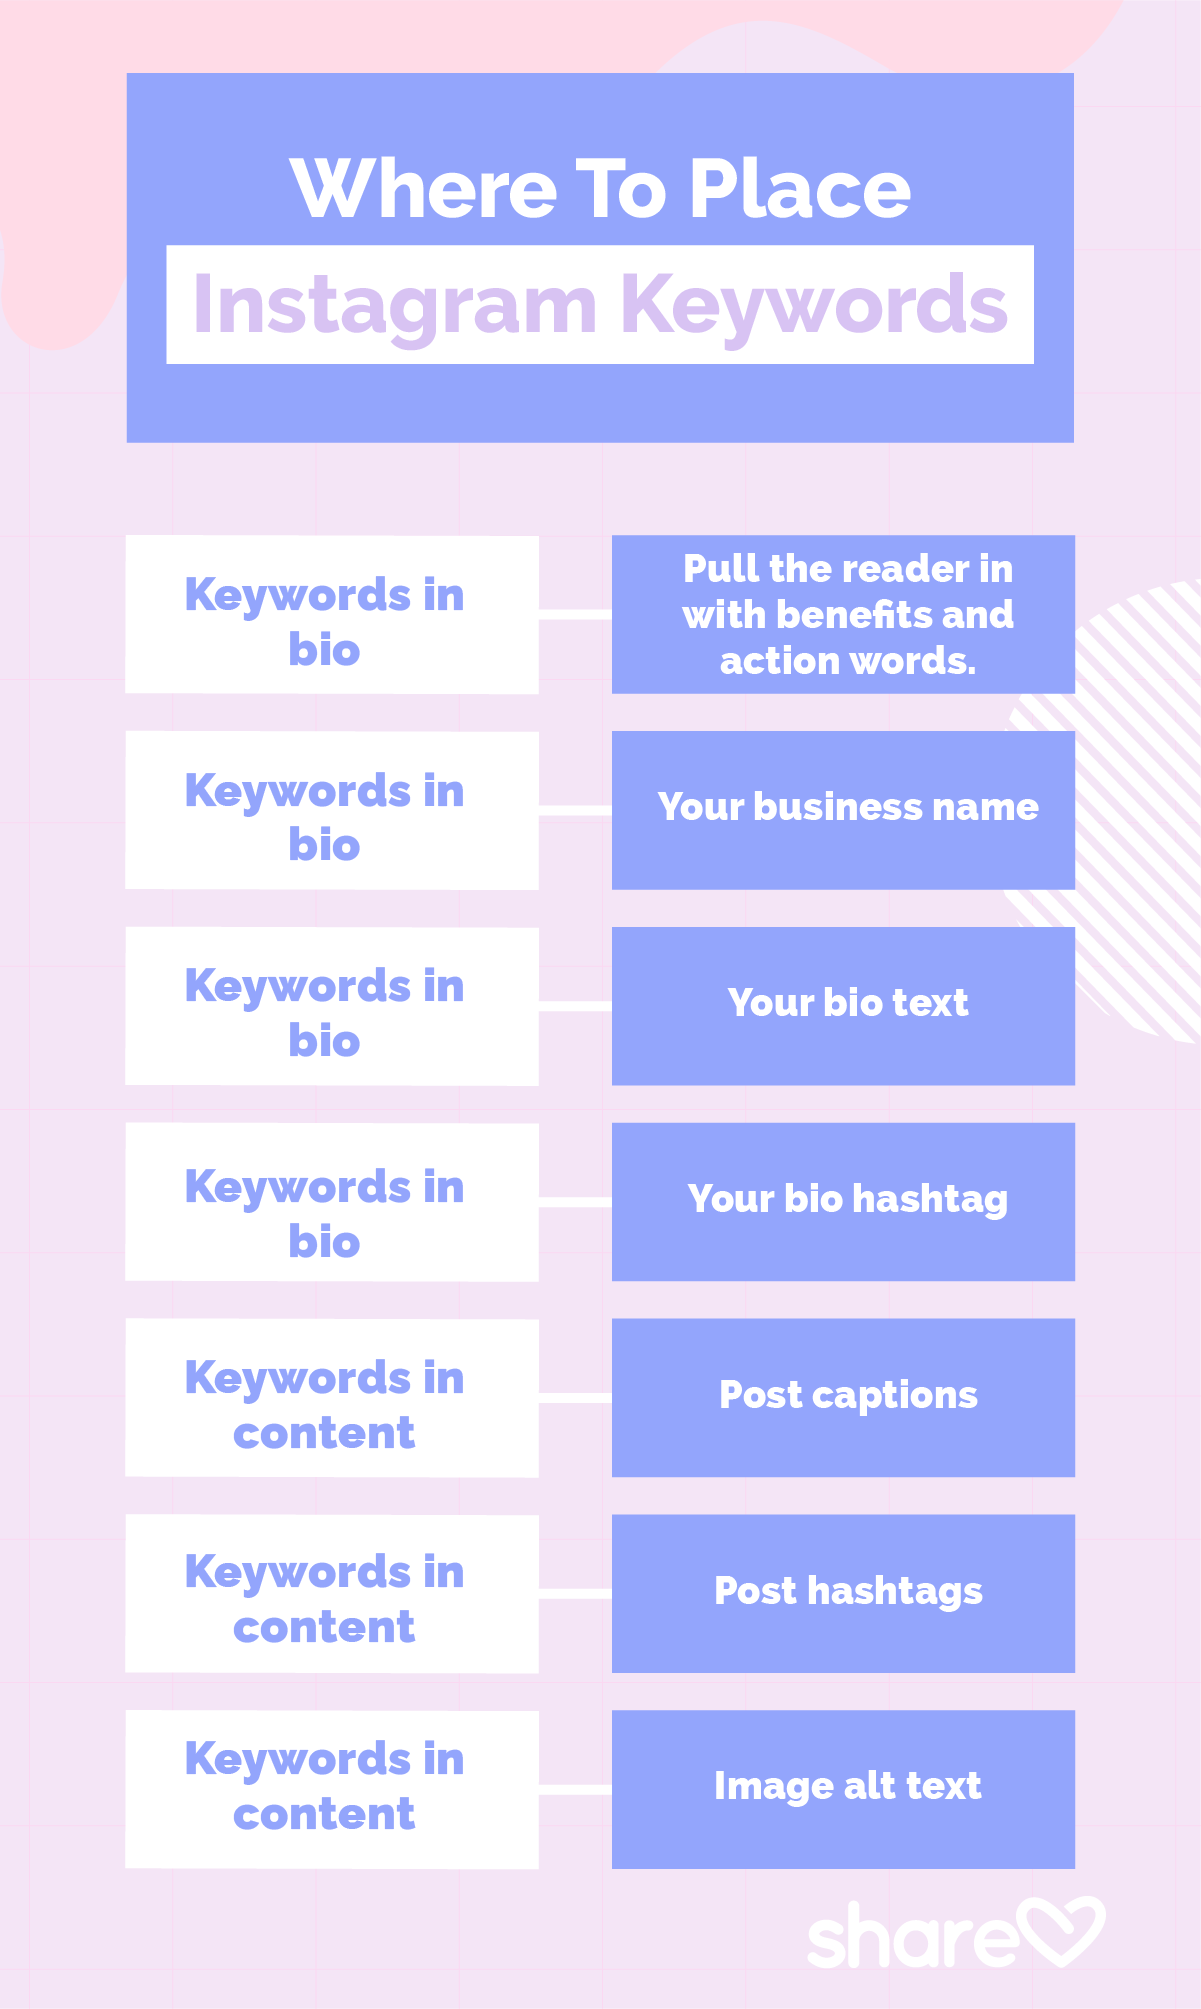 Where To Place Instagram Keywords